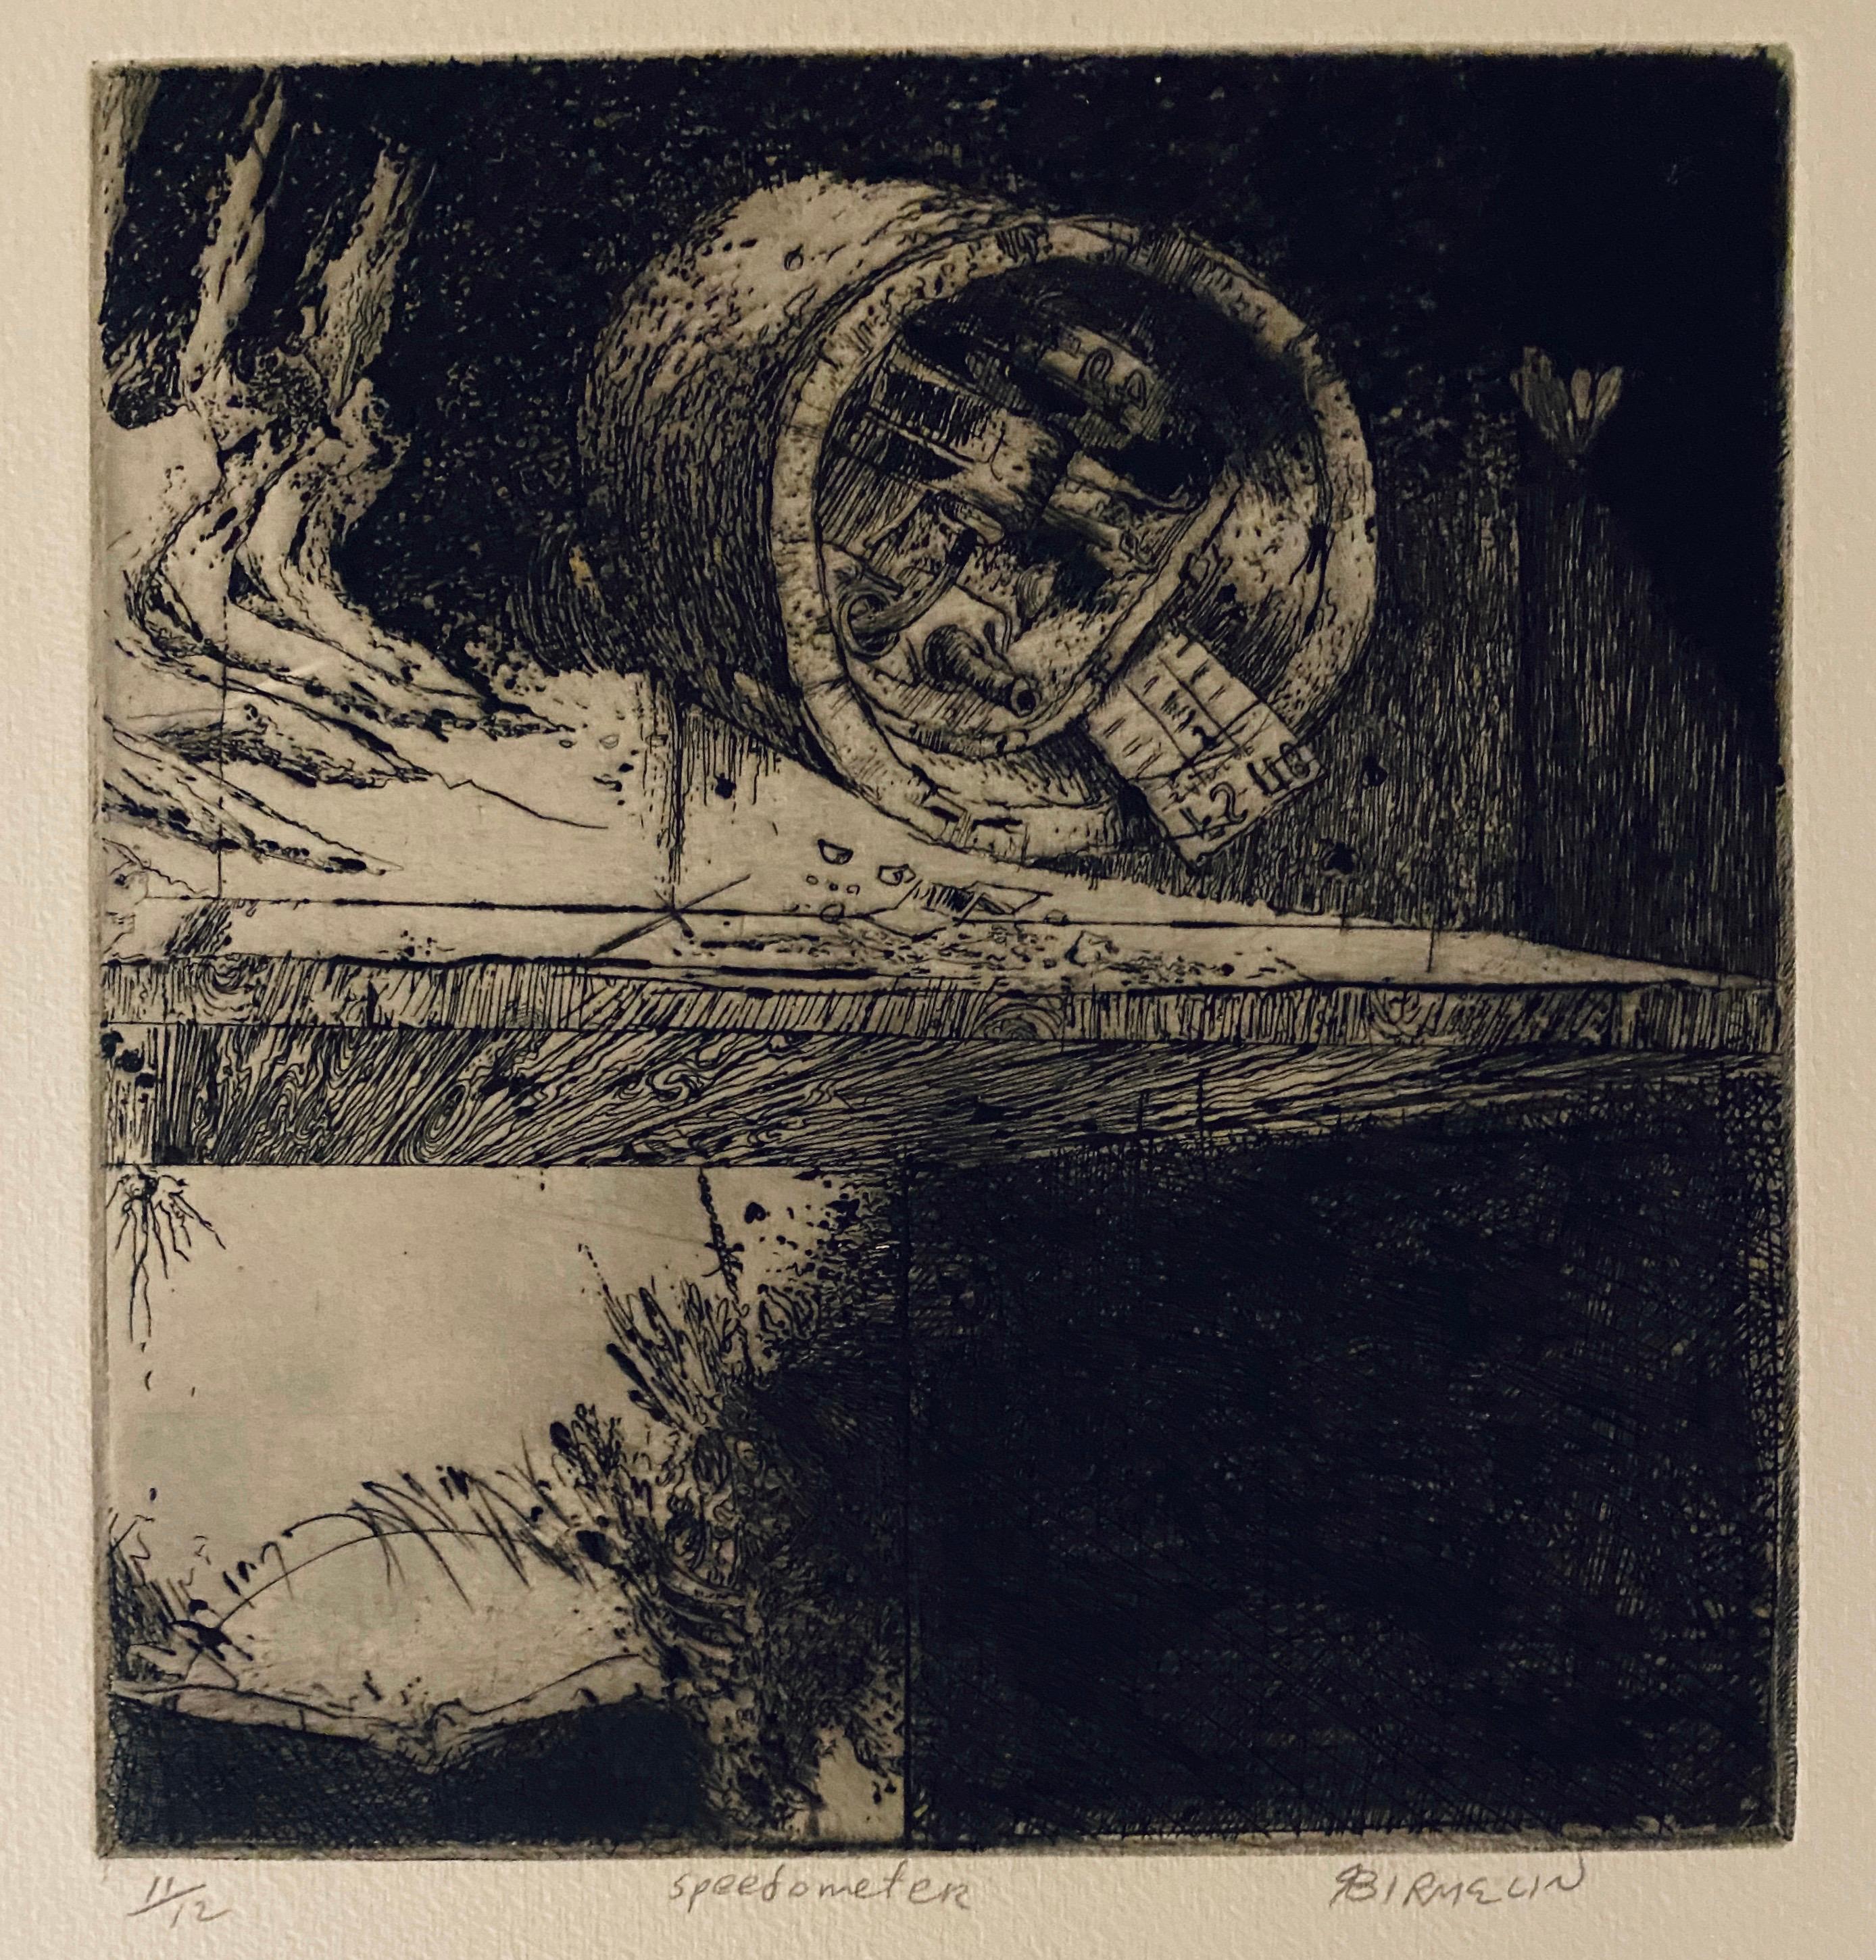 Speedometer, American Modernist Abstract Etching